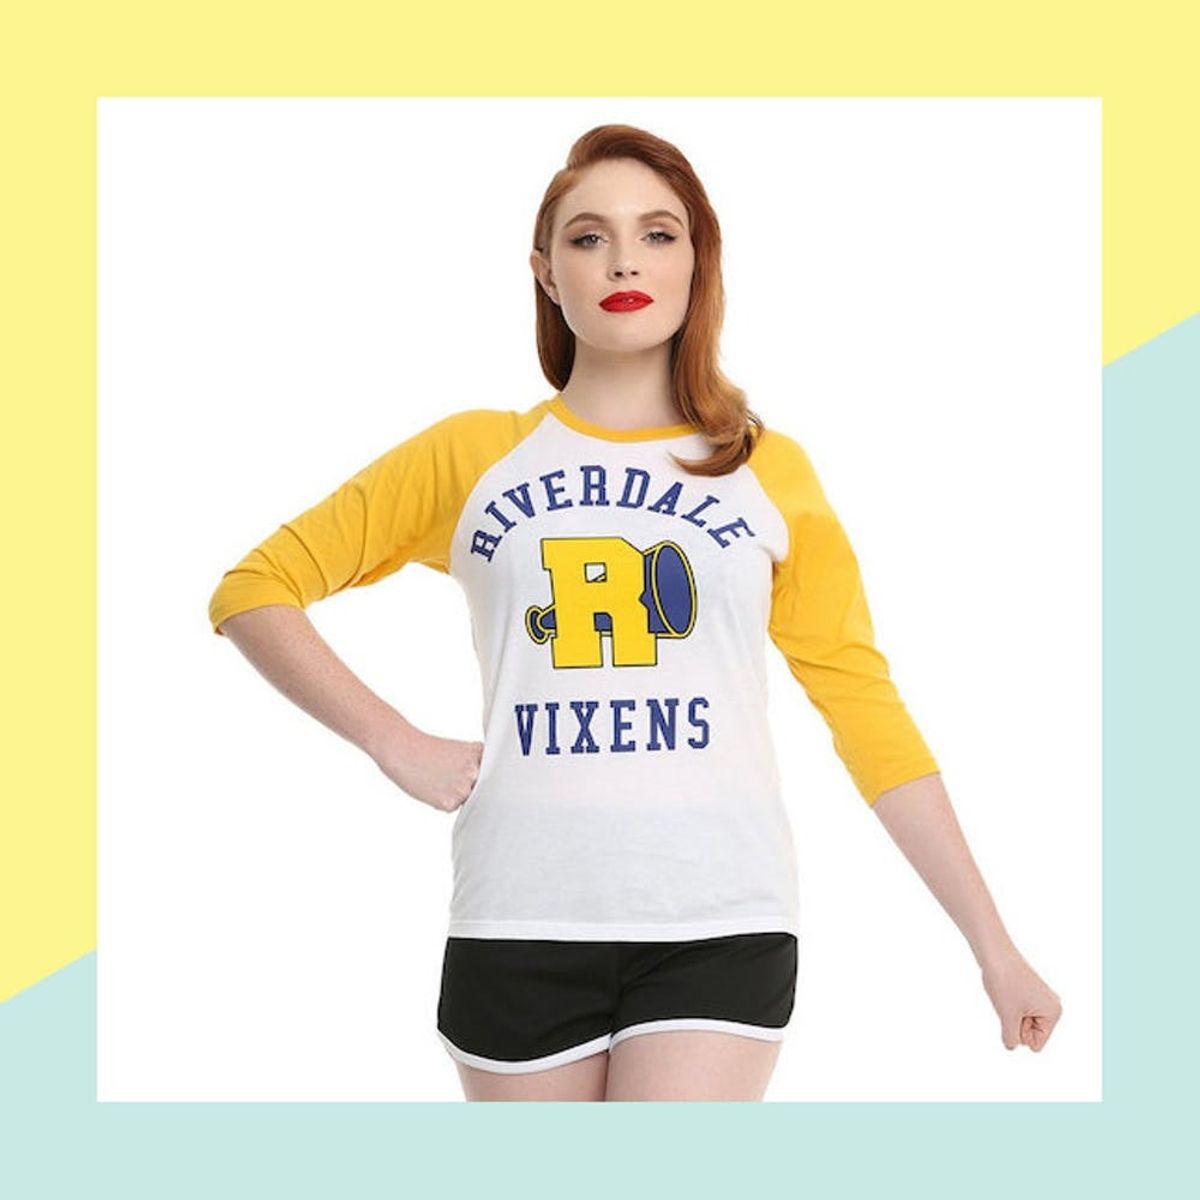 Hot Topic Has a Line of “Riverdale” Merch That Would Impress Even Jughead